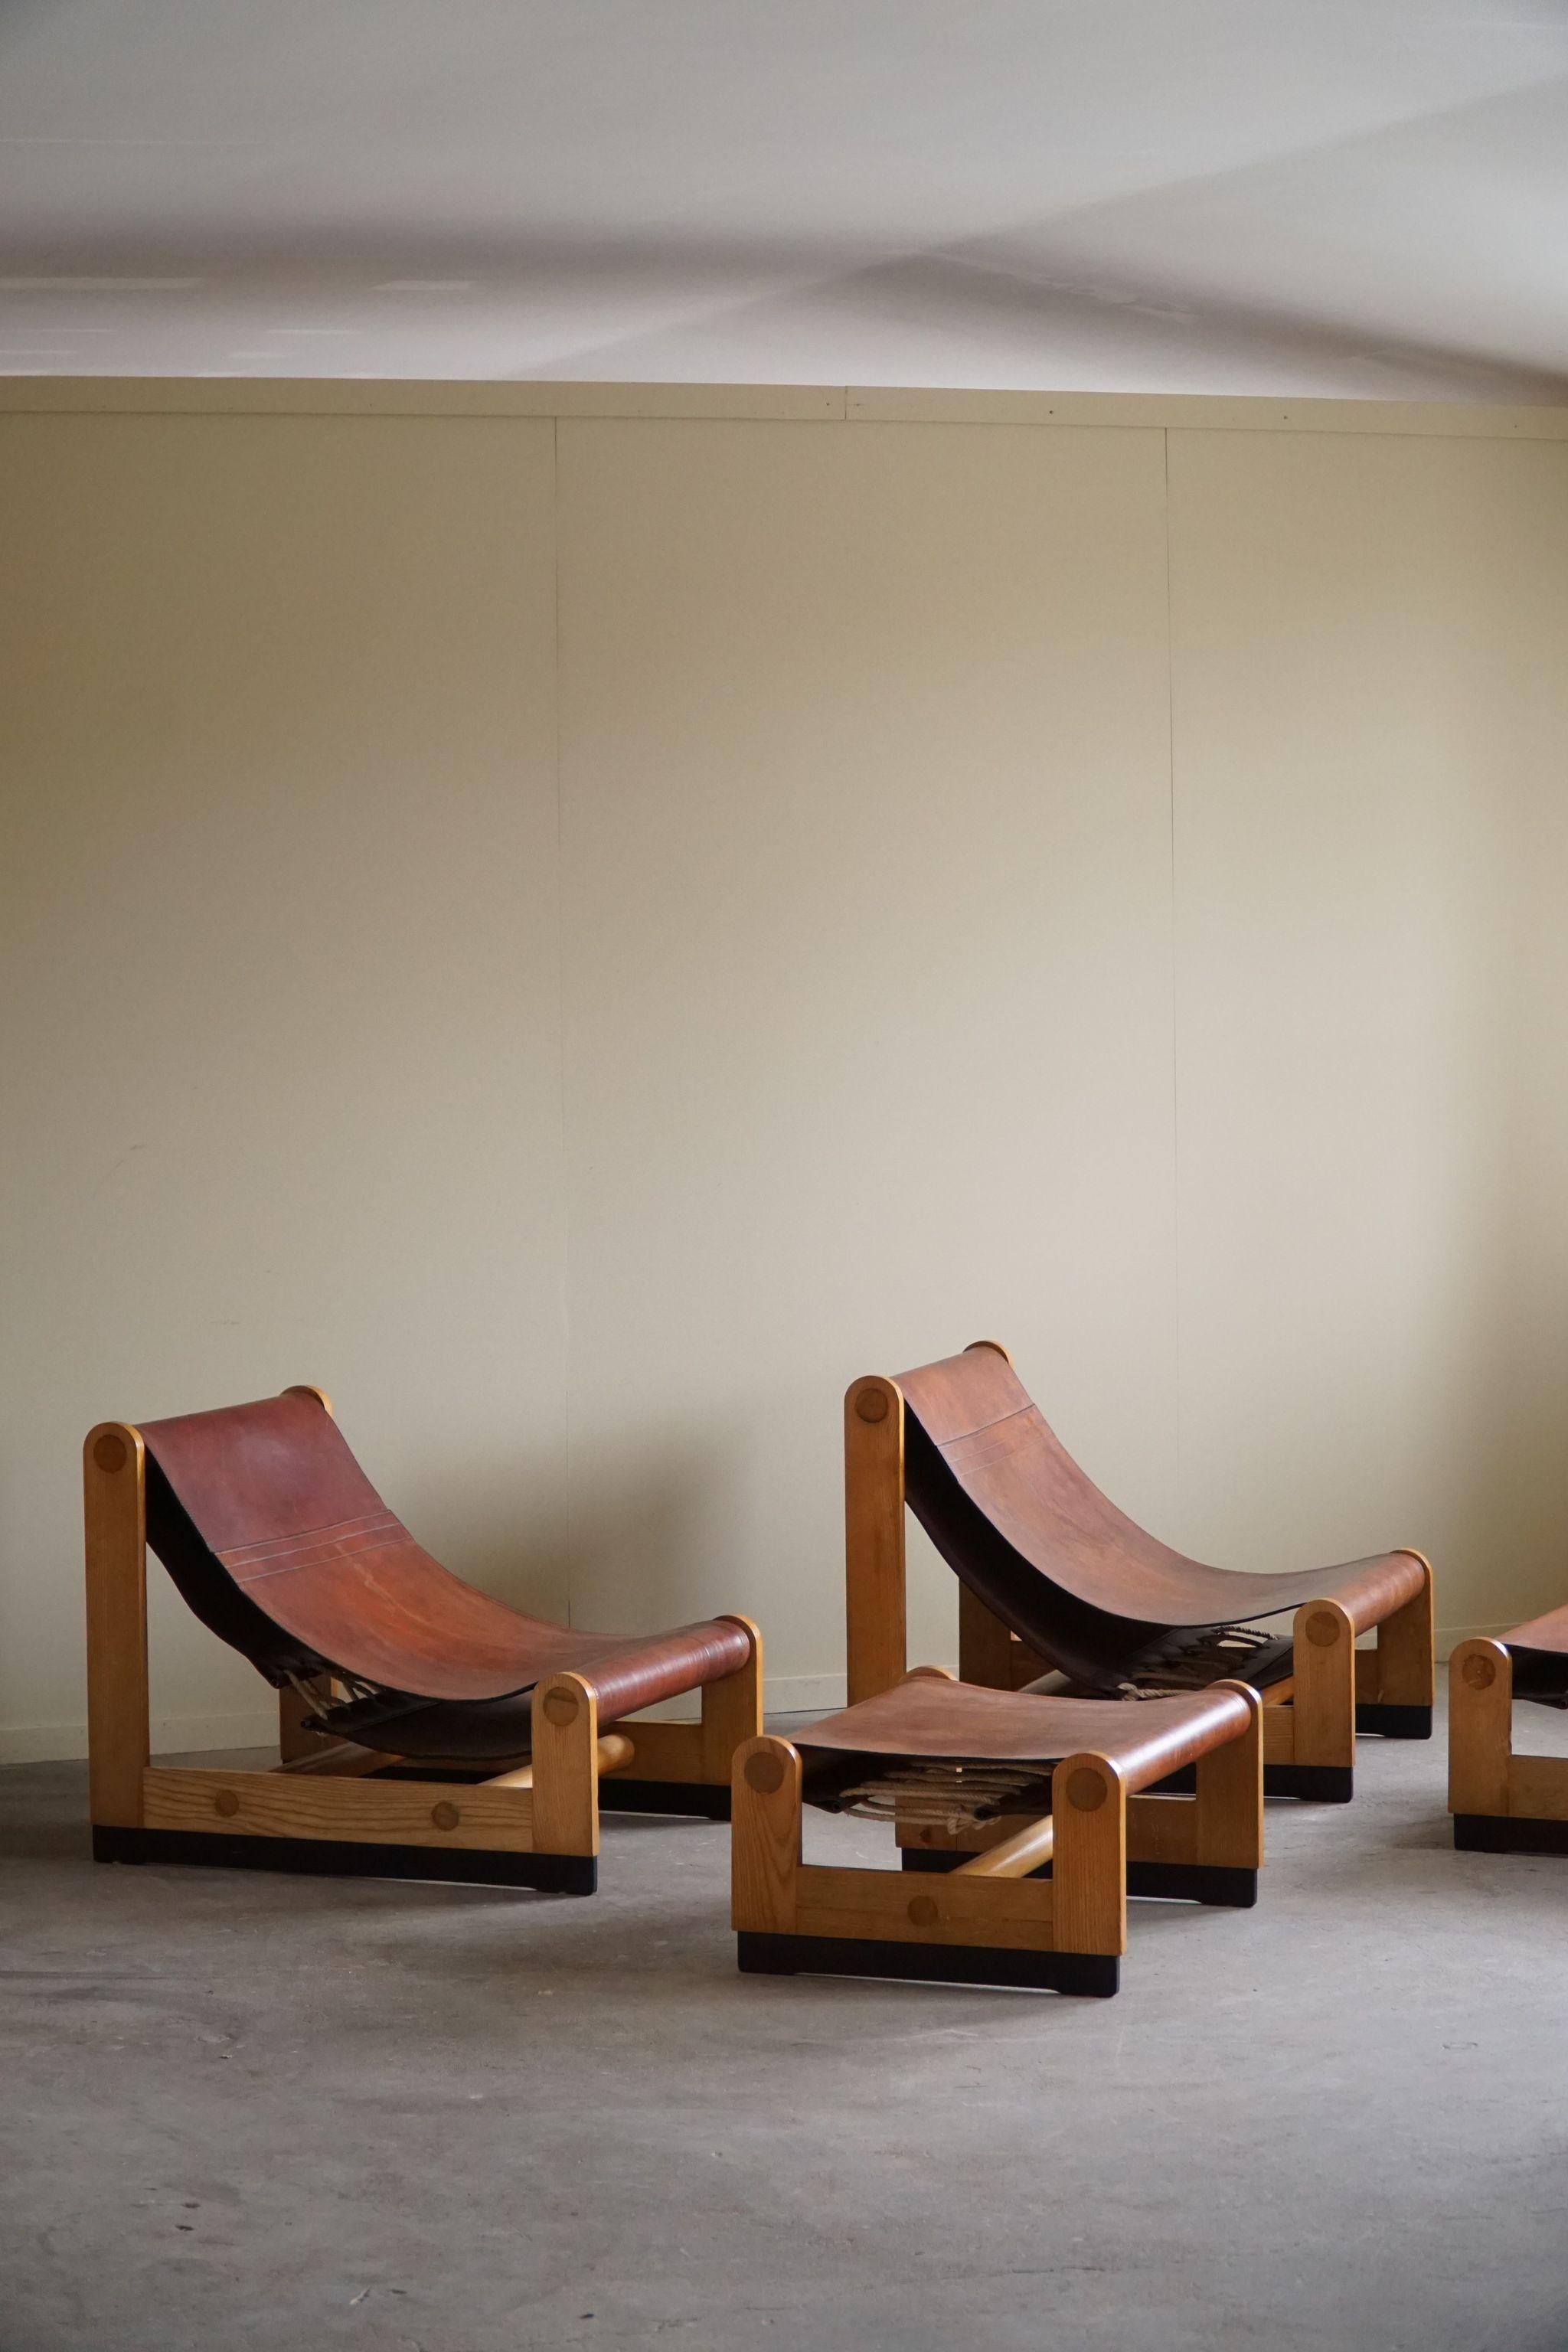 Francesco Lucianetti, Lounge Chairs in Leather & Elm, Italian Modern, 1960s For Sale 8